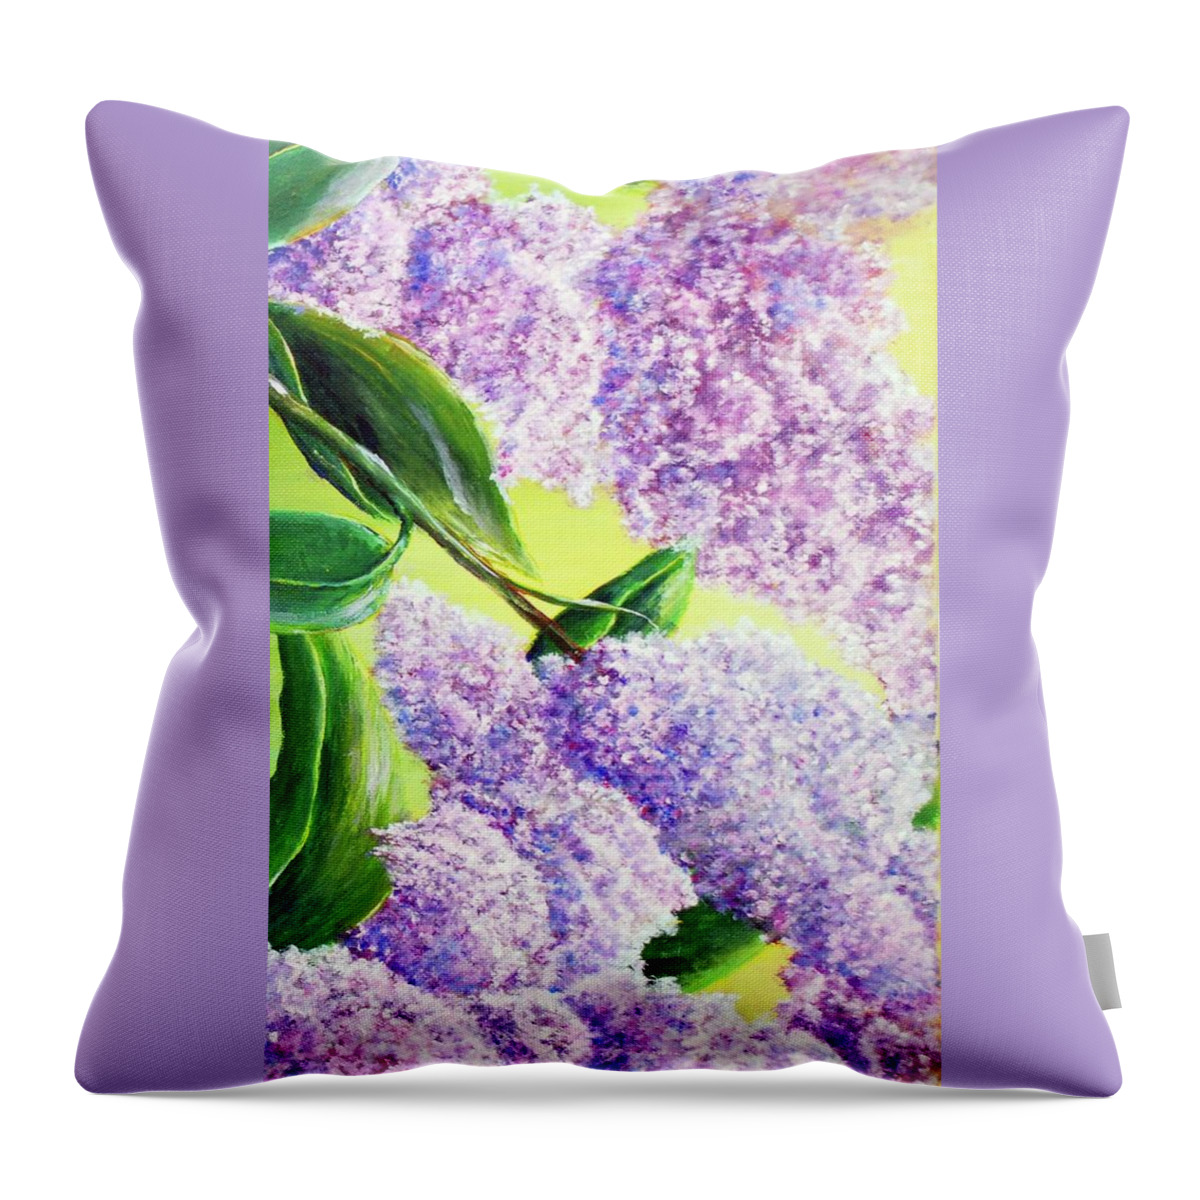 Lilac Throw Pillow featuring the painting Lilac by Medea Ioseliani